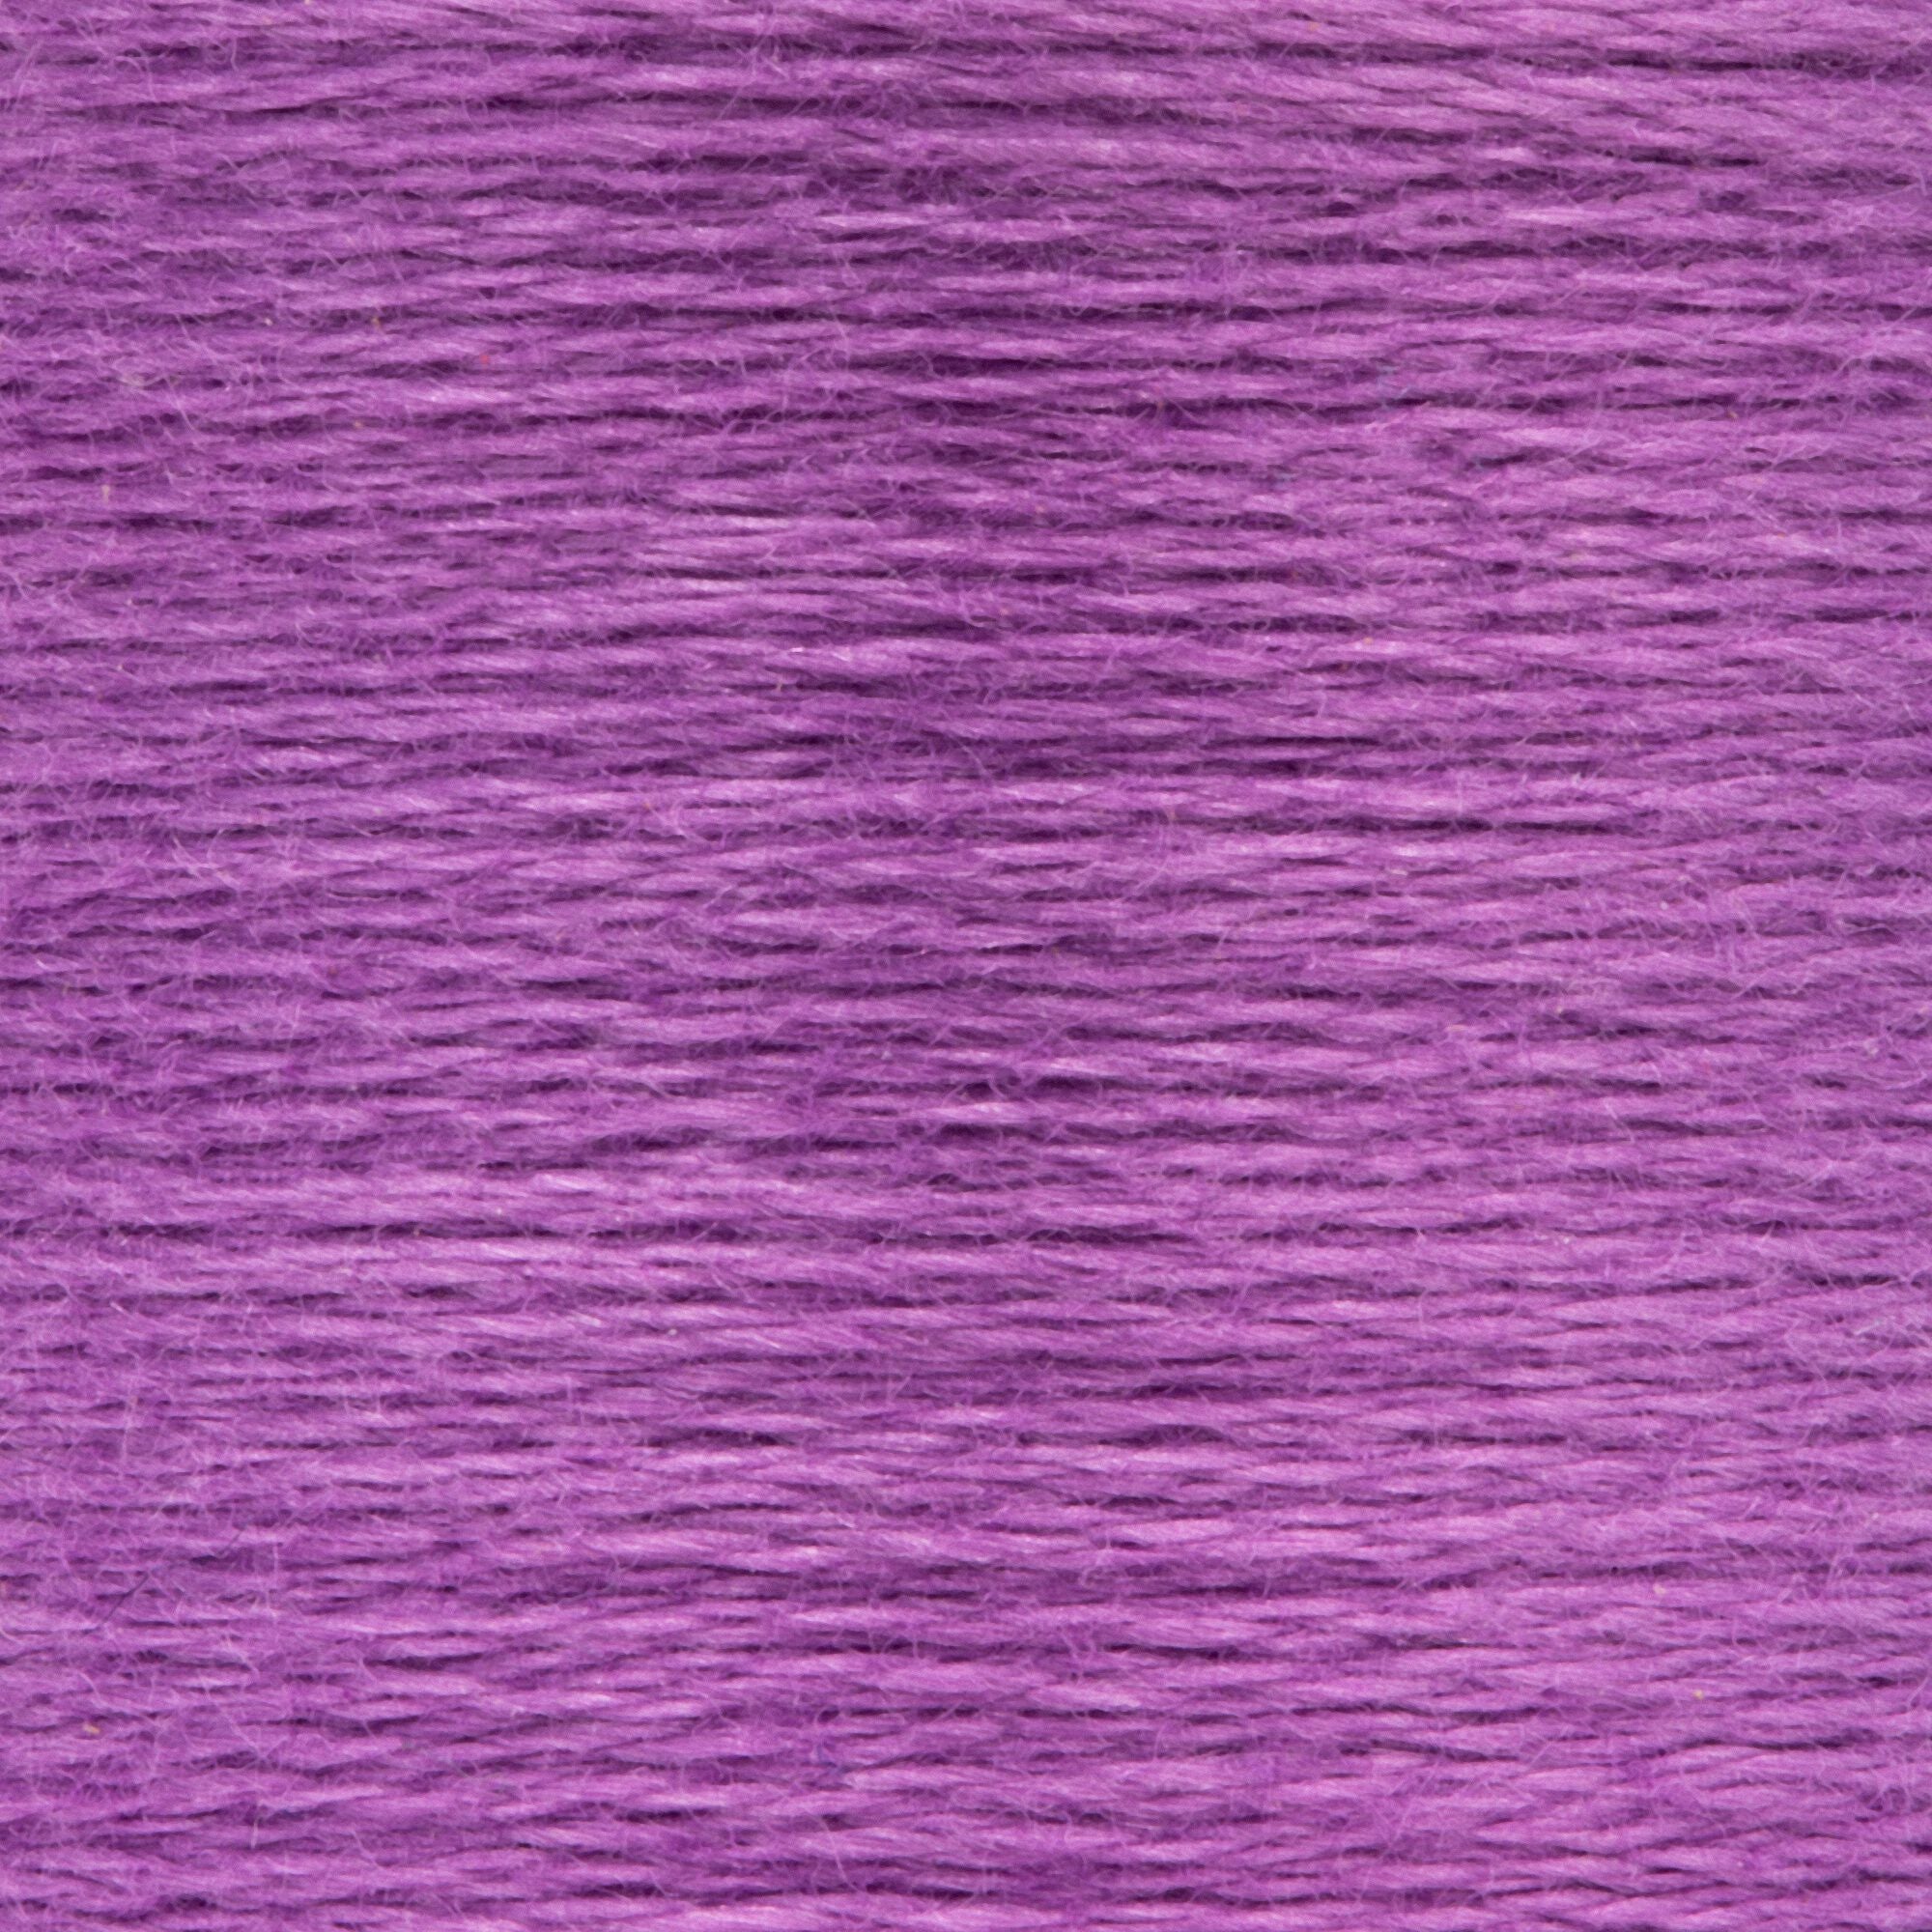 Anchor Embroidery Floss in Violet Med